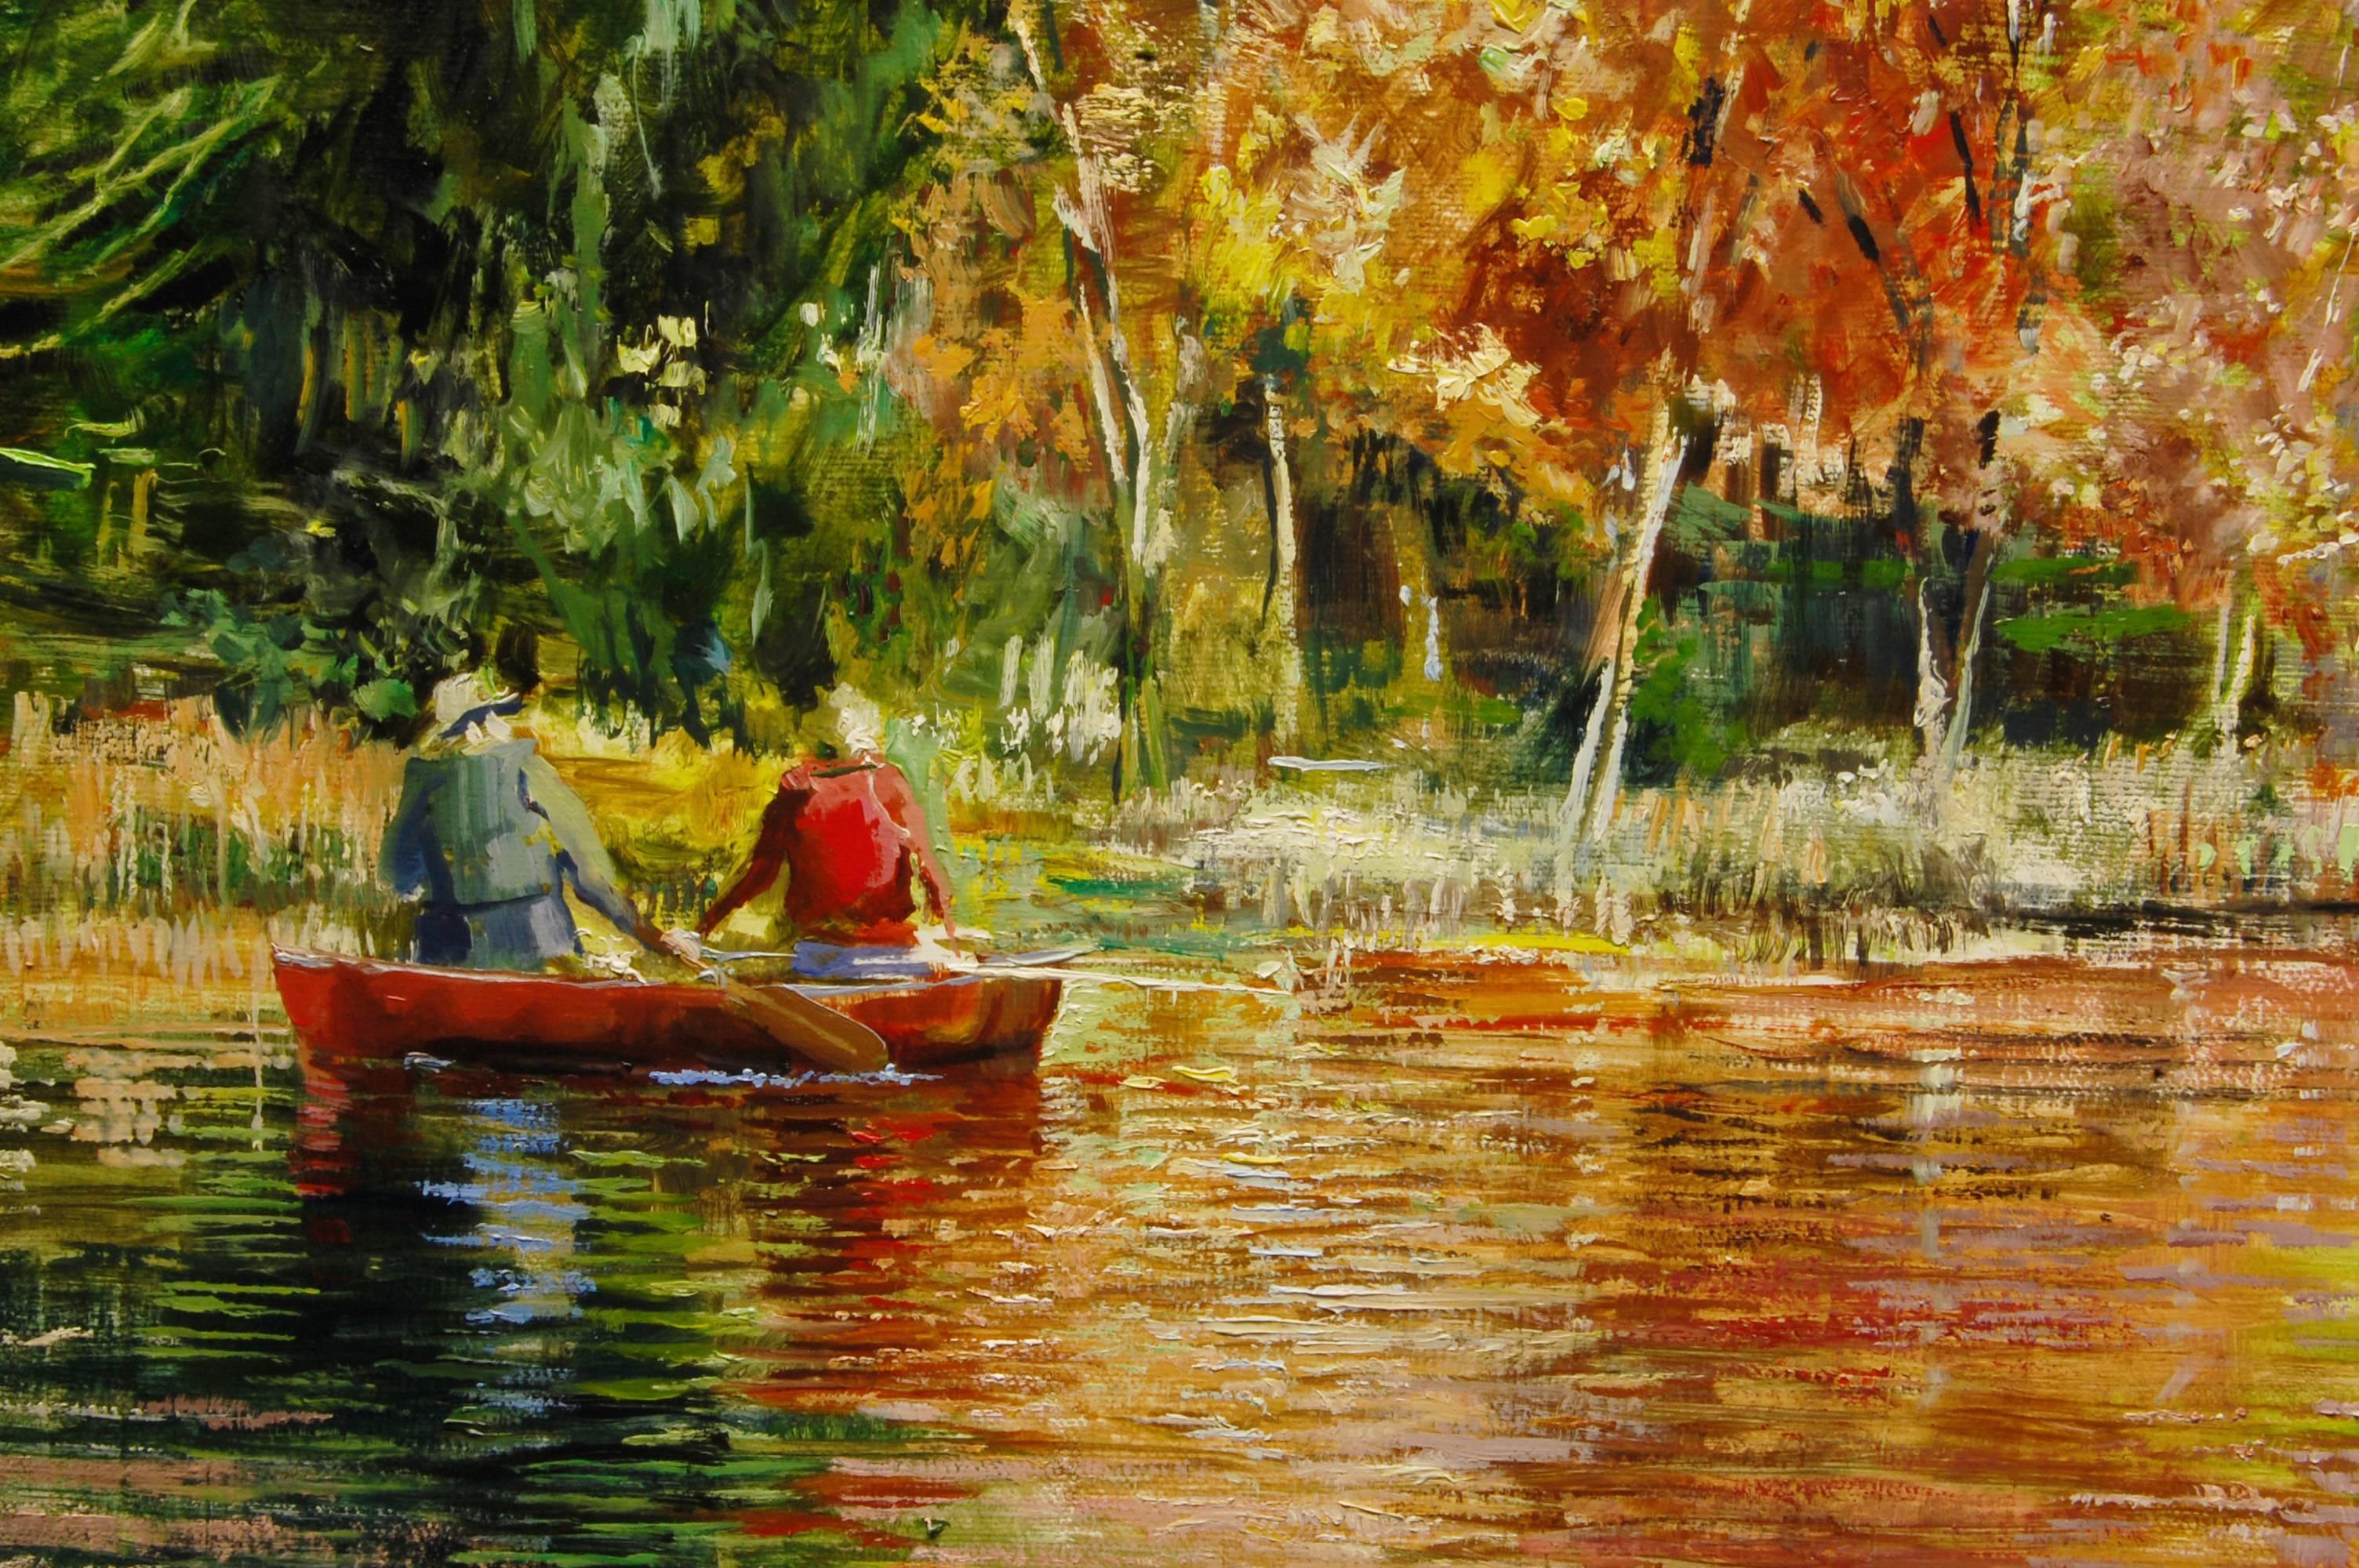 <p>Artist Comments<br />I often paddle my kayak on the Rockaway River near my house in NJ. The river is quiet and peaceful having a lazy current most of the time. For my outbound journey I usually paddle eastward following the river downstream. This